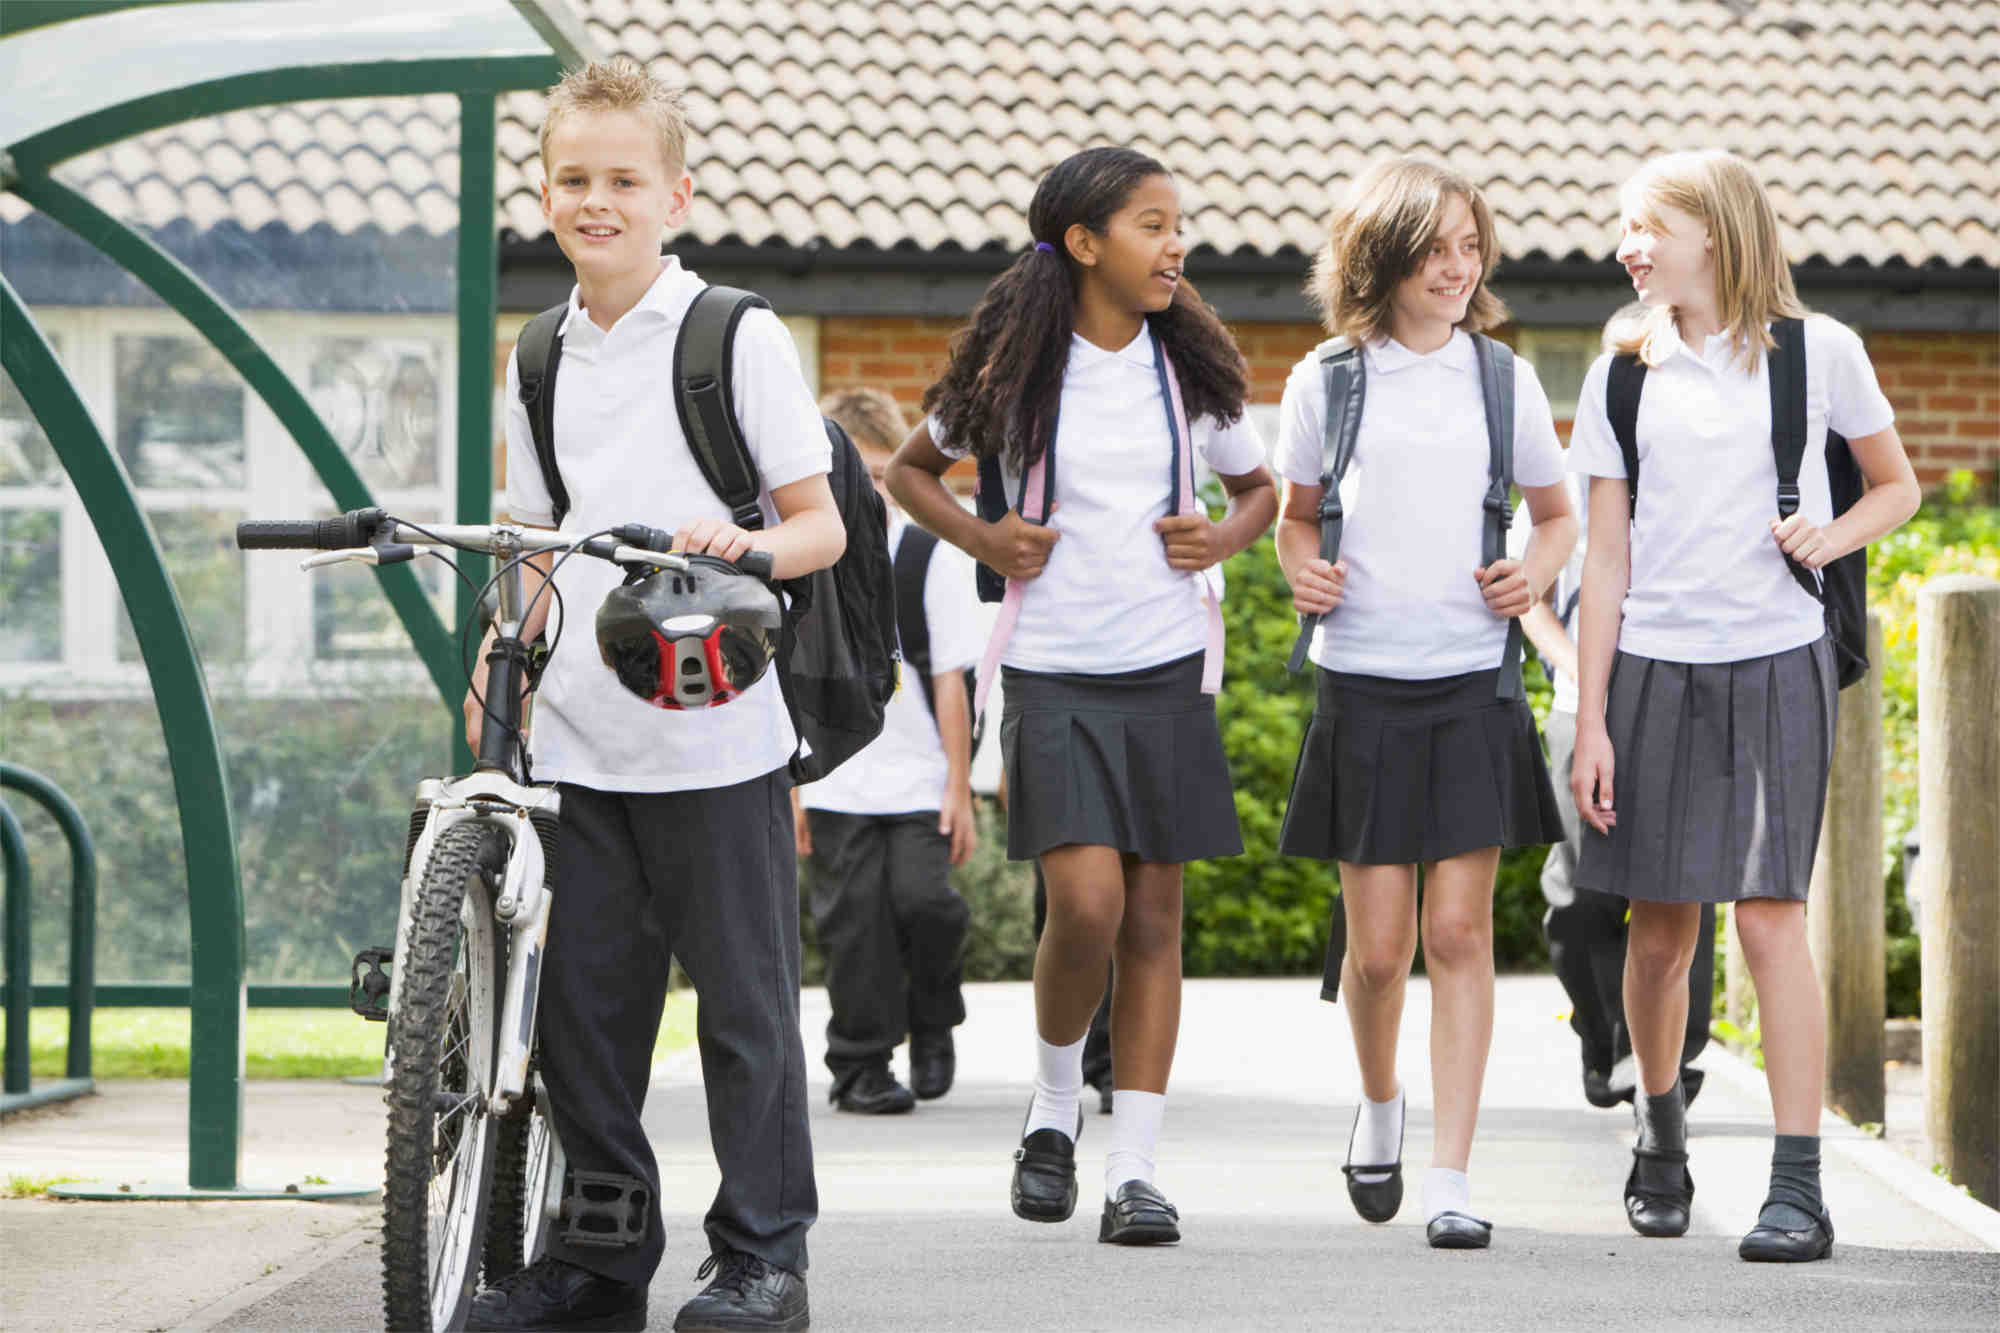 children in white polo shirts and grey trousers or skirts school uniform near school bike shelter a boy in the the foreground with his bike and three girls walking and smiling as they talk to each other - Footsteps Educational Psychology whole school consultancy